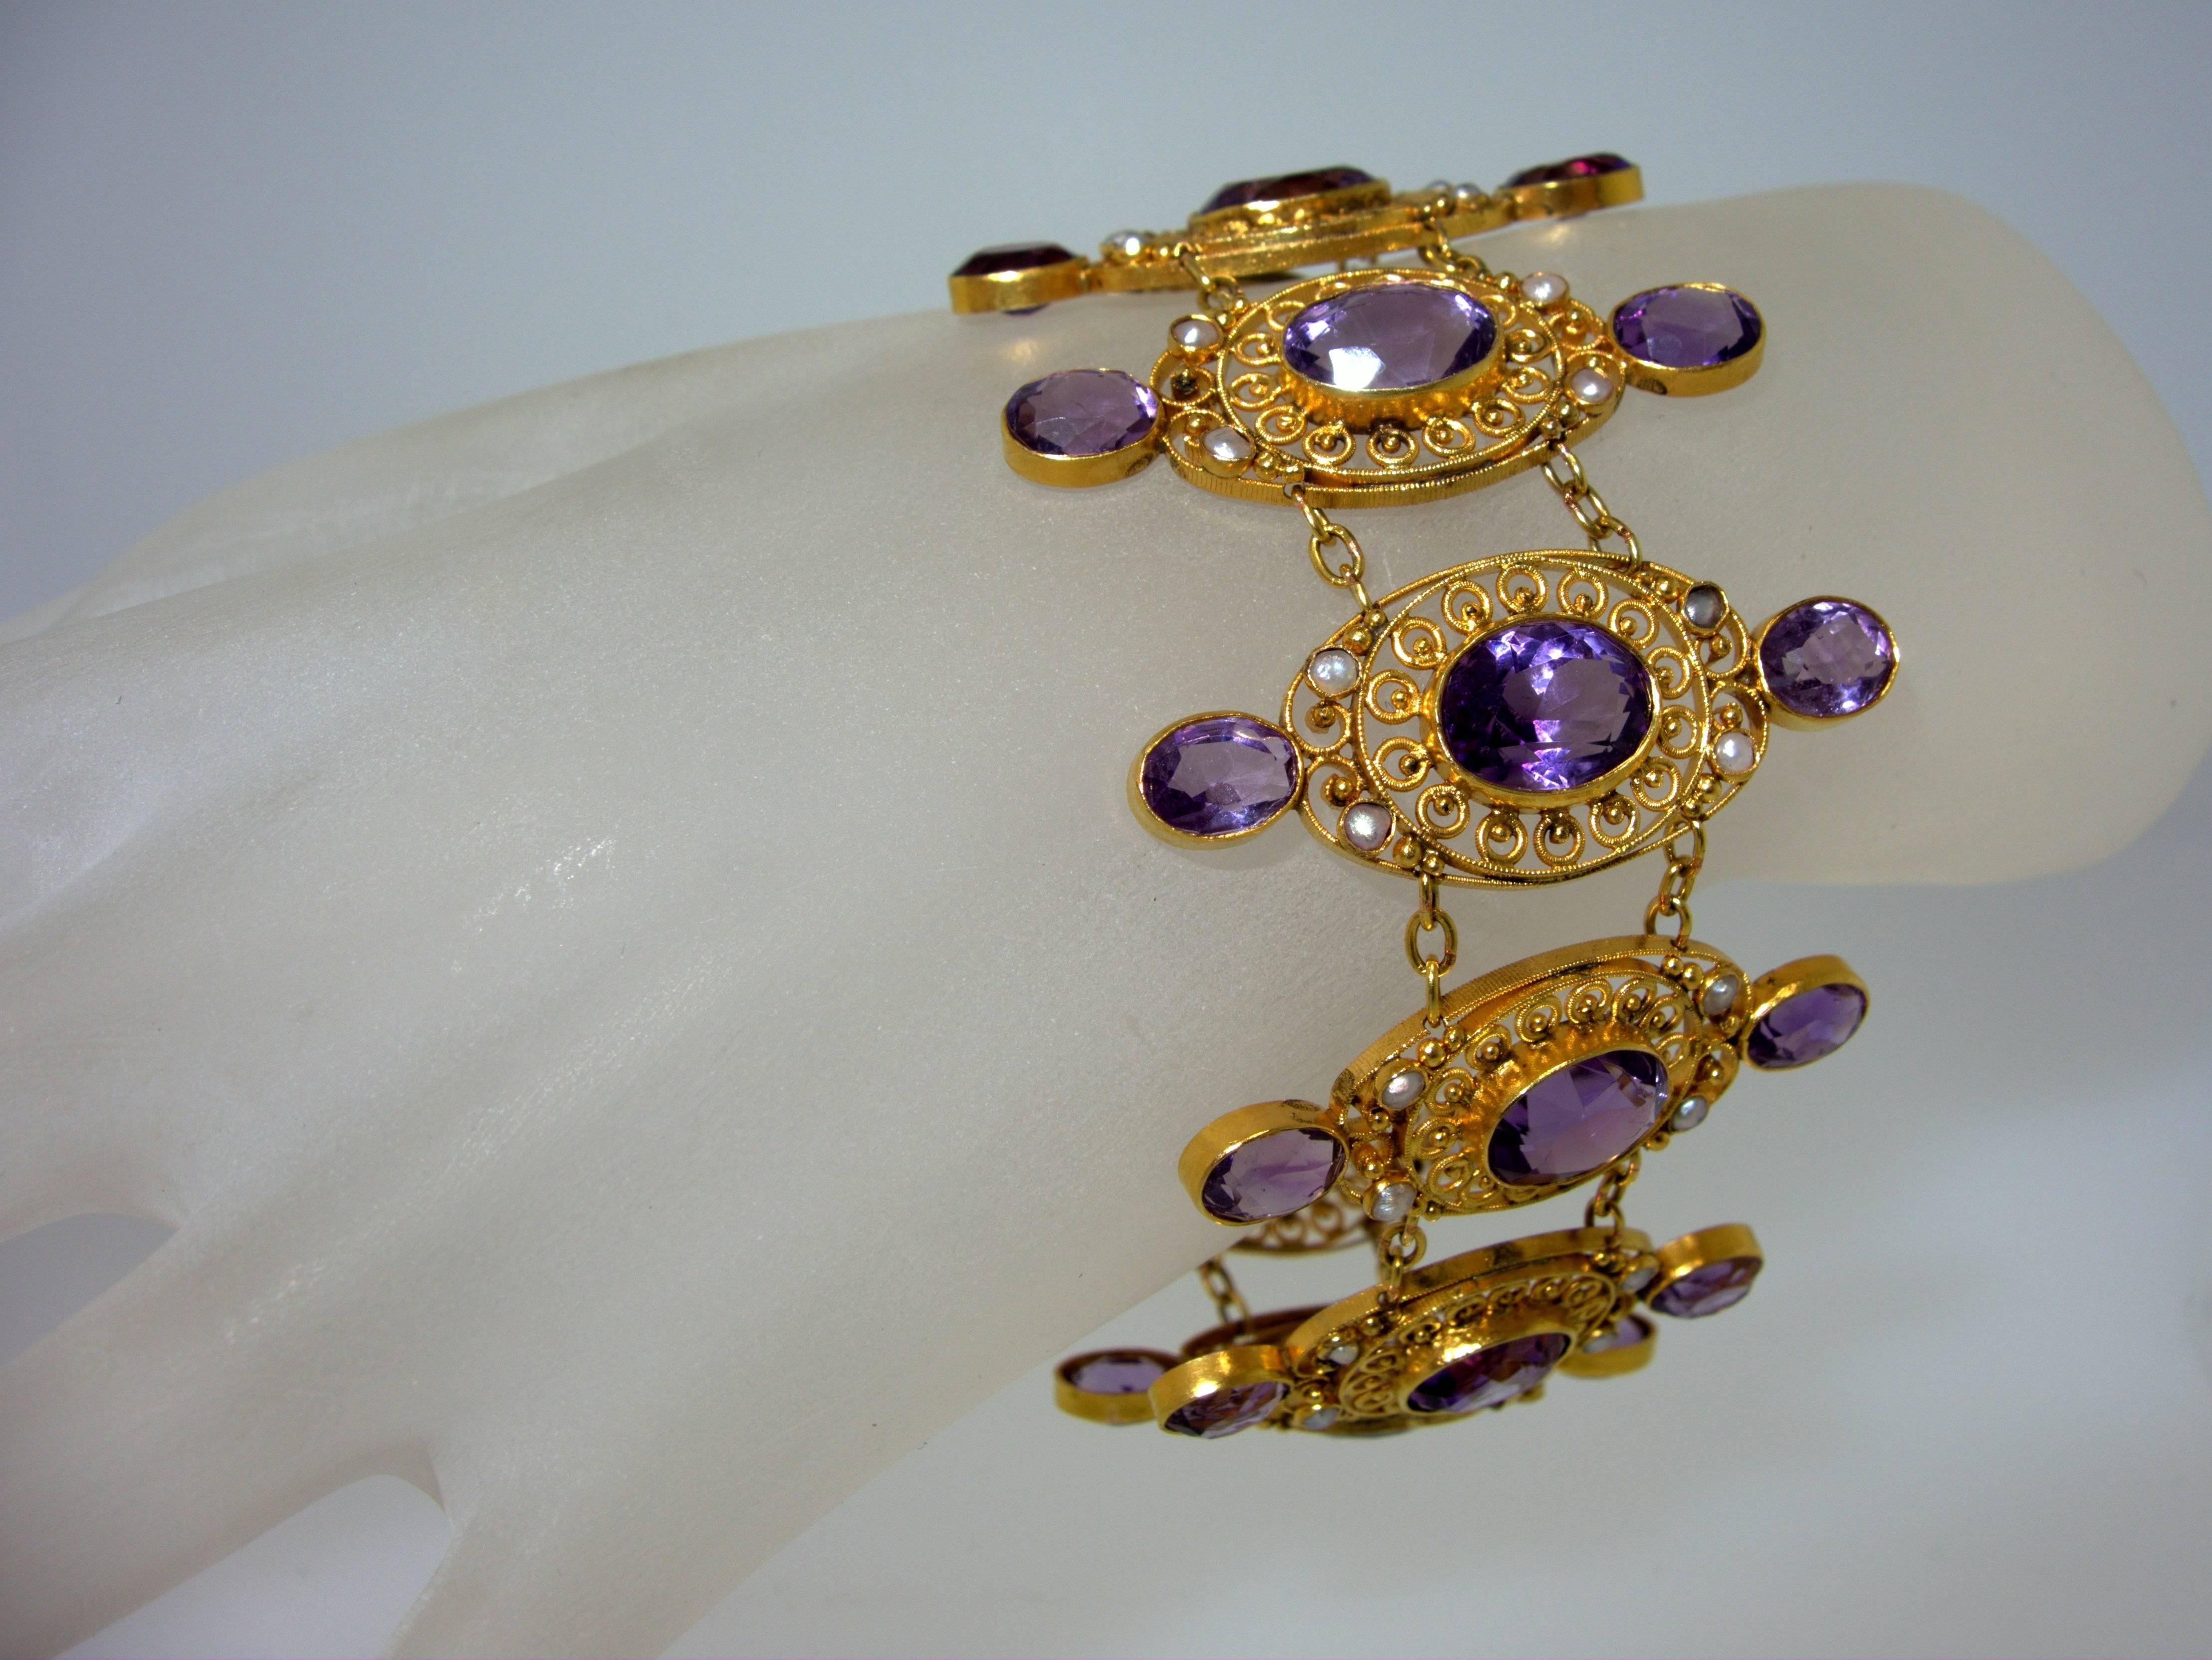 Women's Victorian Matching Amethyst Pearl Gold Bracelets And Necklace